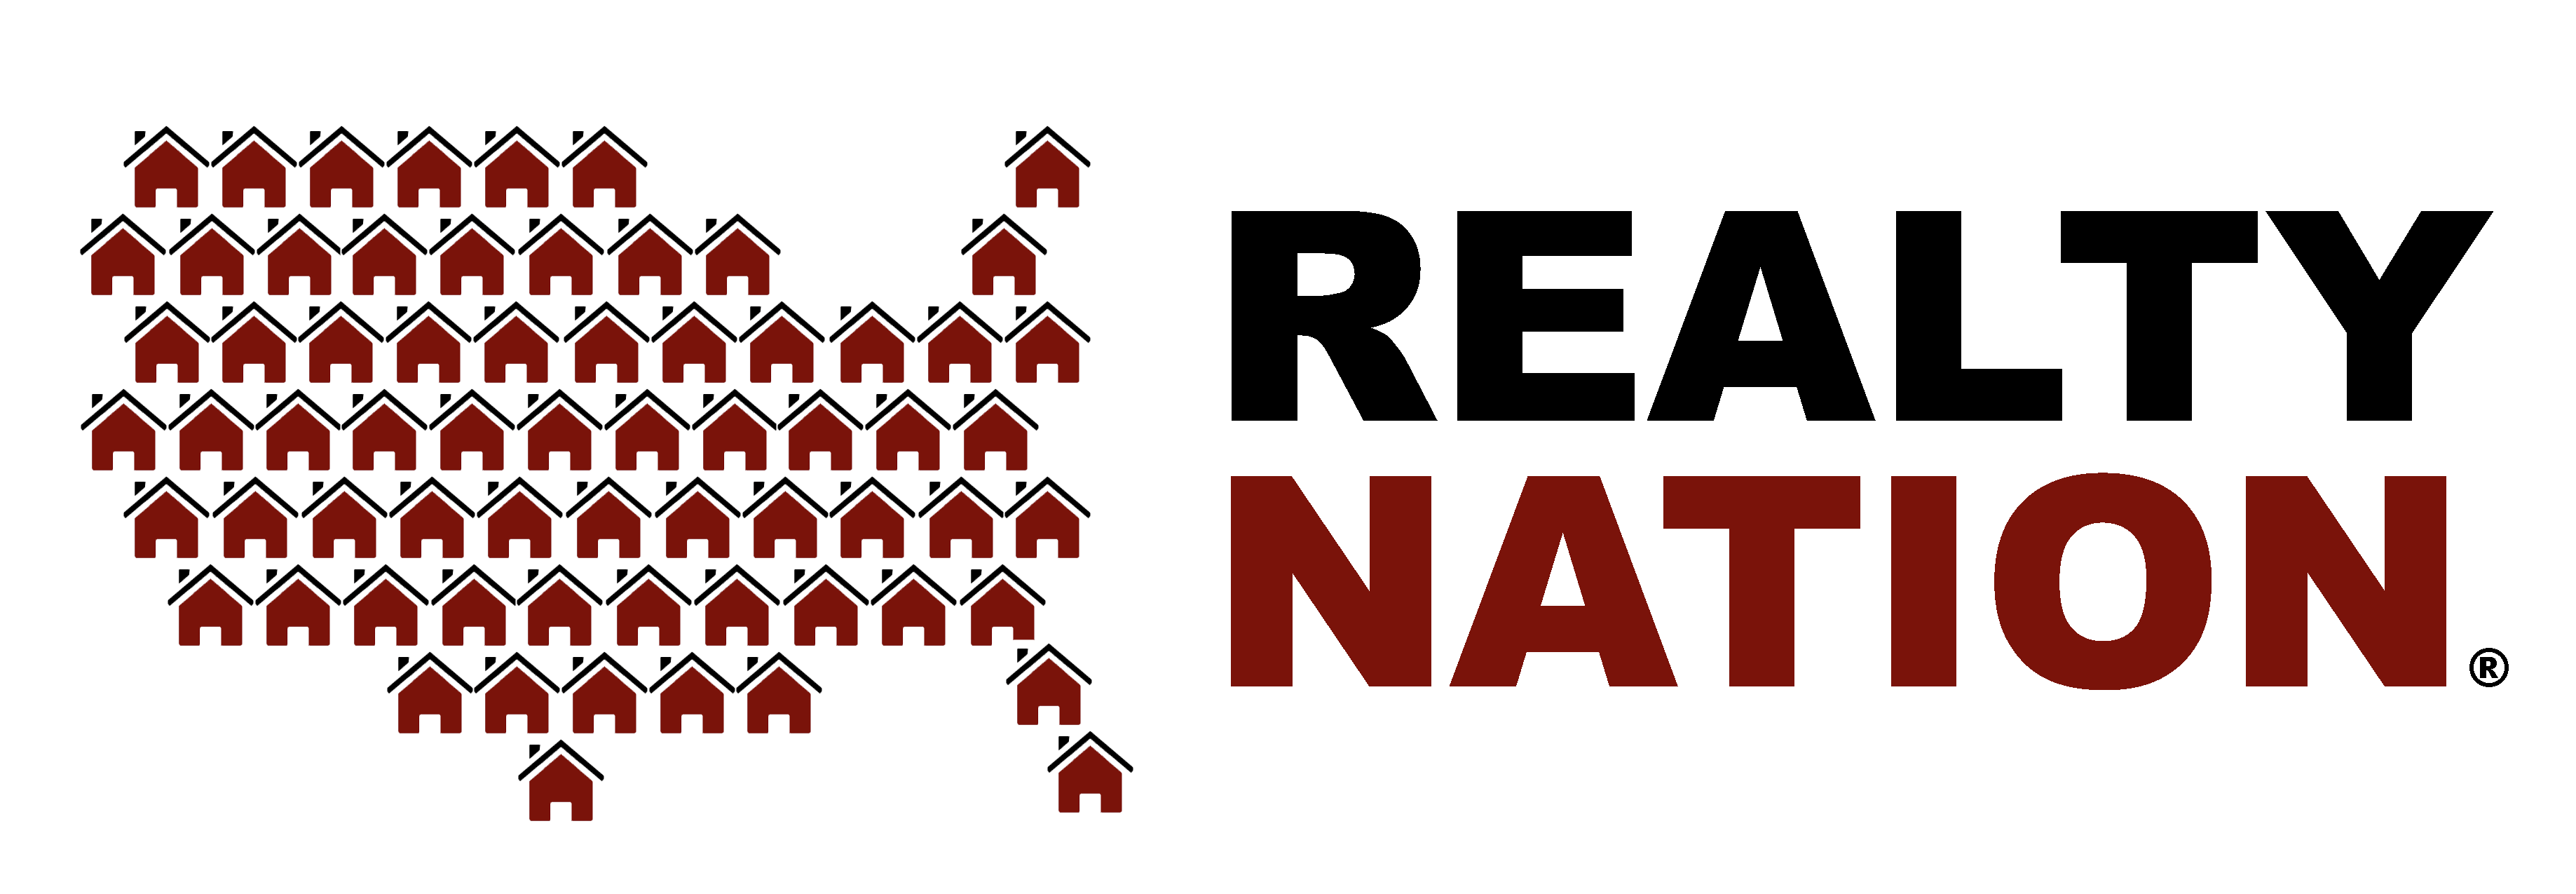 Realty Nation Agents